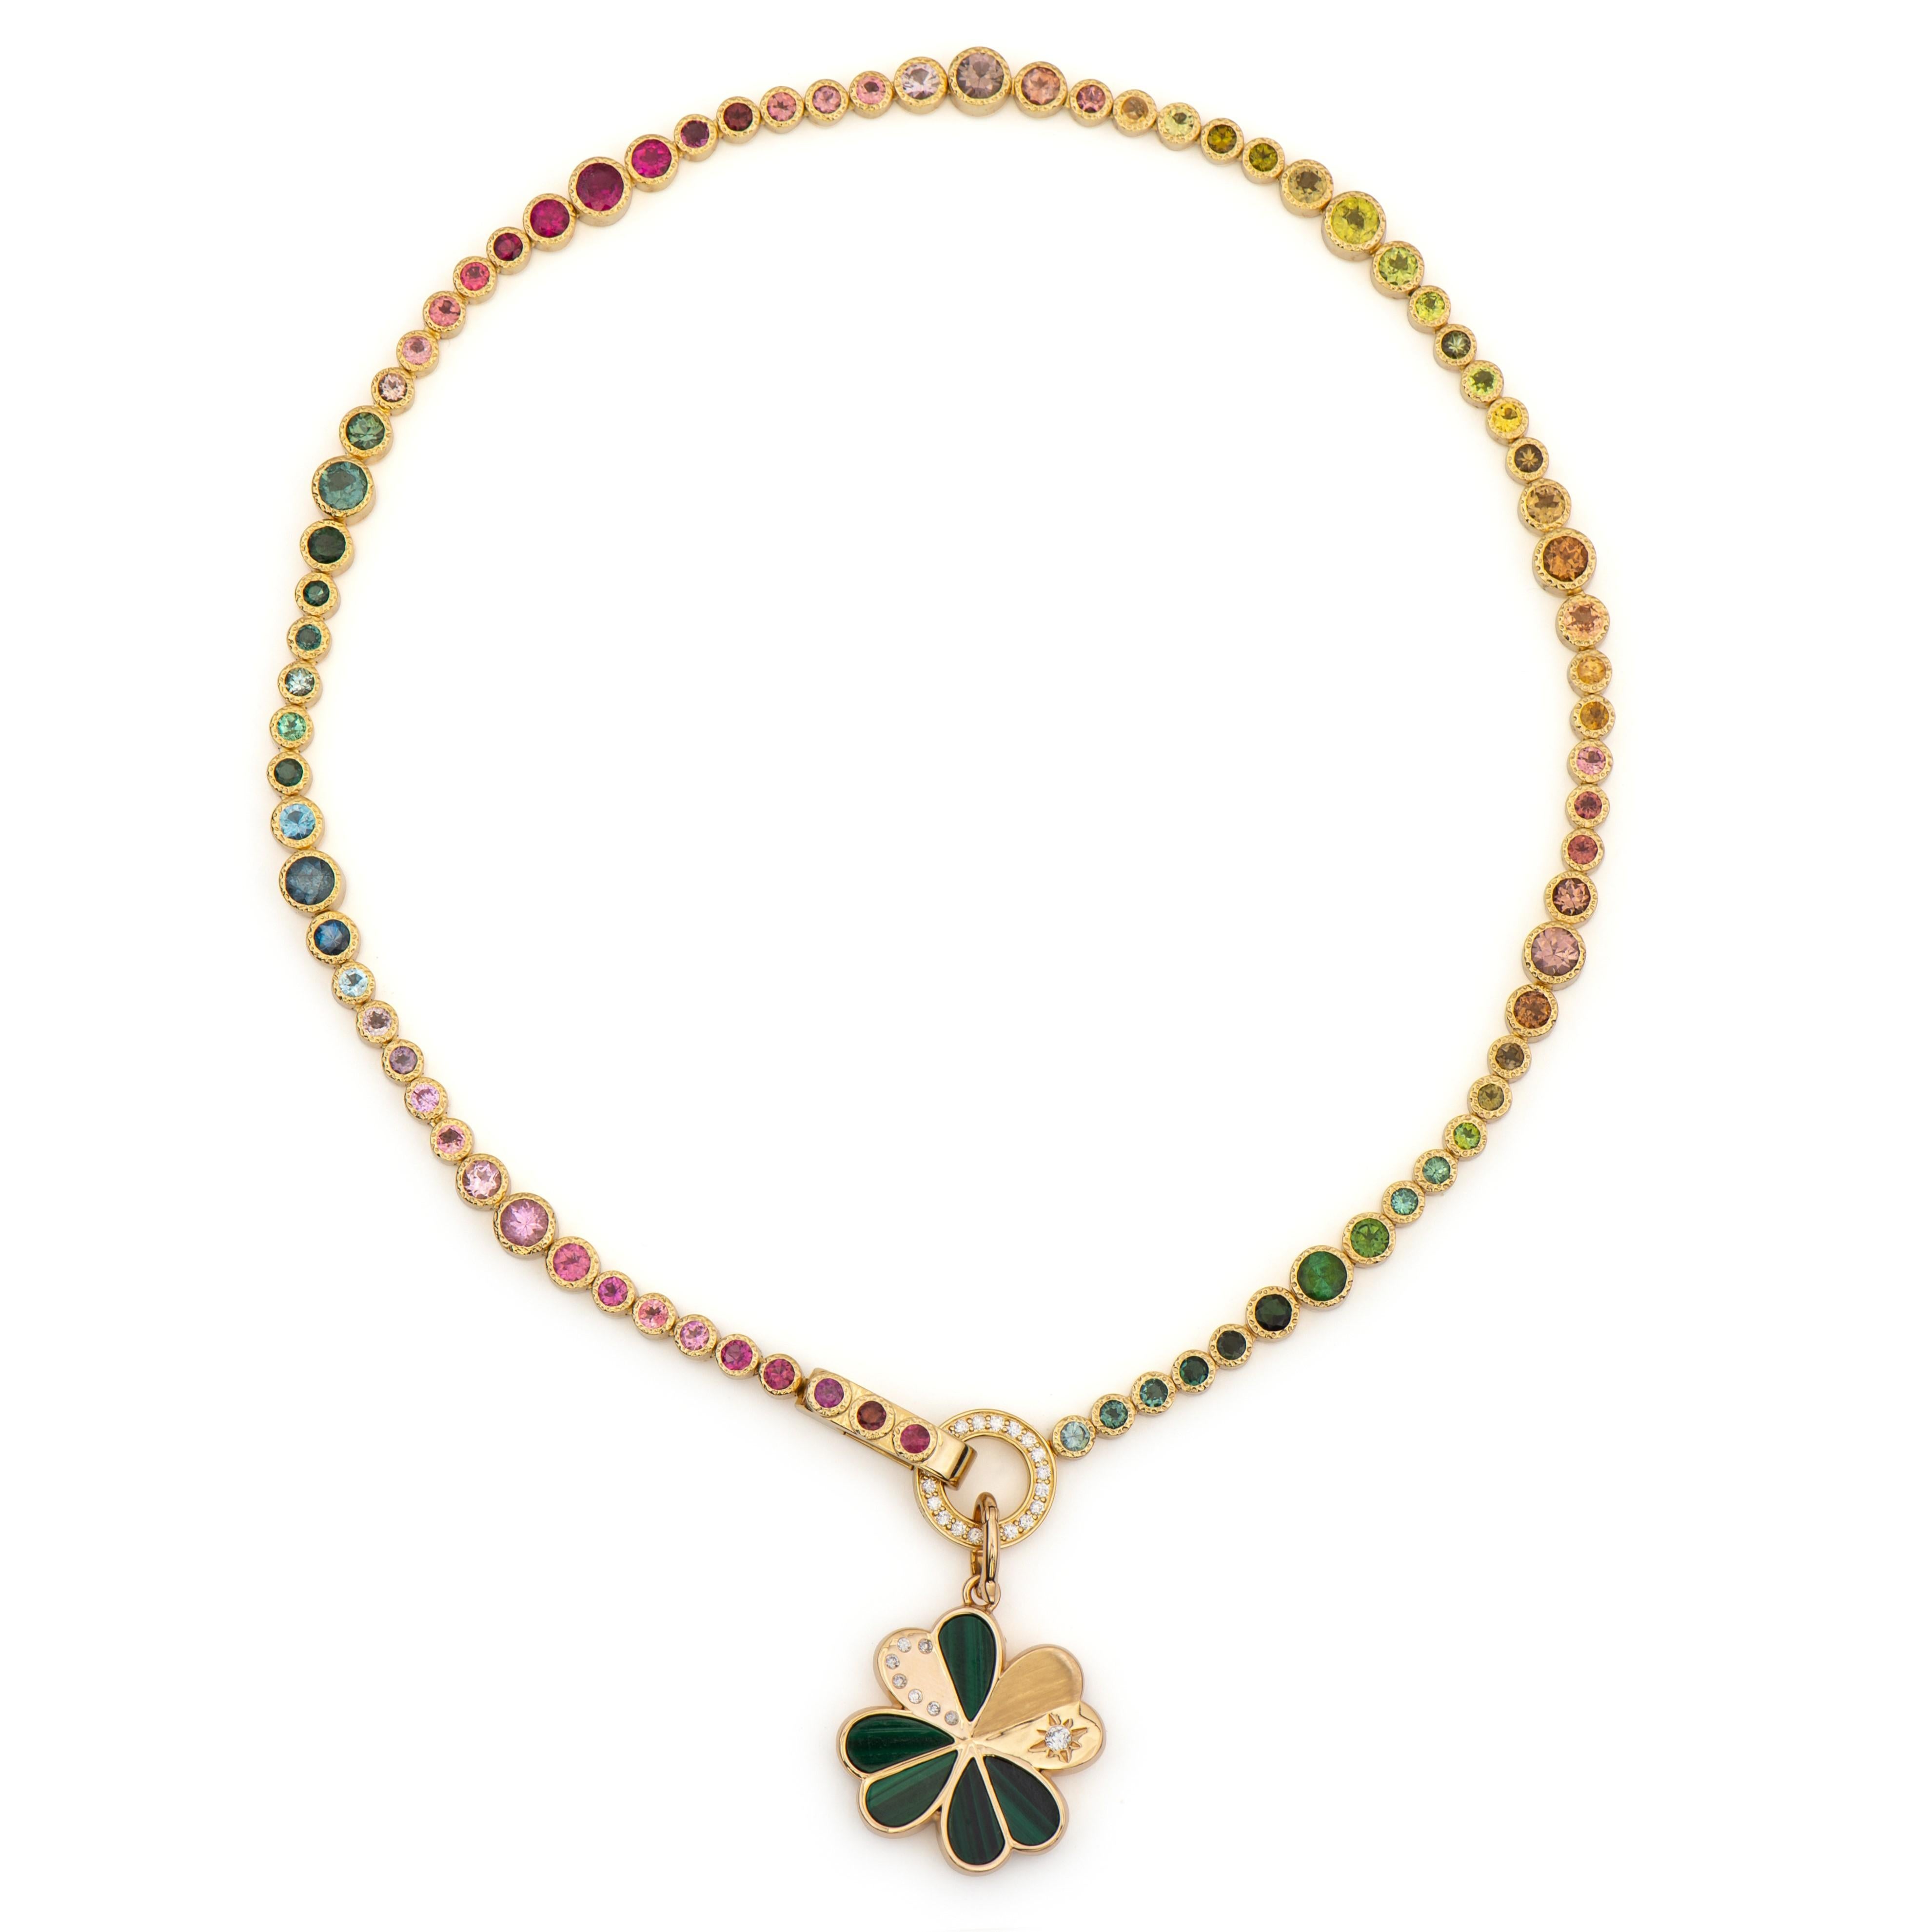 Tell your story... This 14K Yellow Gold, Diamond and Rainbow Tourmaline Chain features 19.9 carats of mixed colored tourmaline with 0.08 TCW of round faceted diamonds. Chain is one of a kind and 16 inches in length. Sold without the pendant. 
